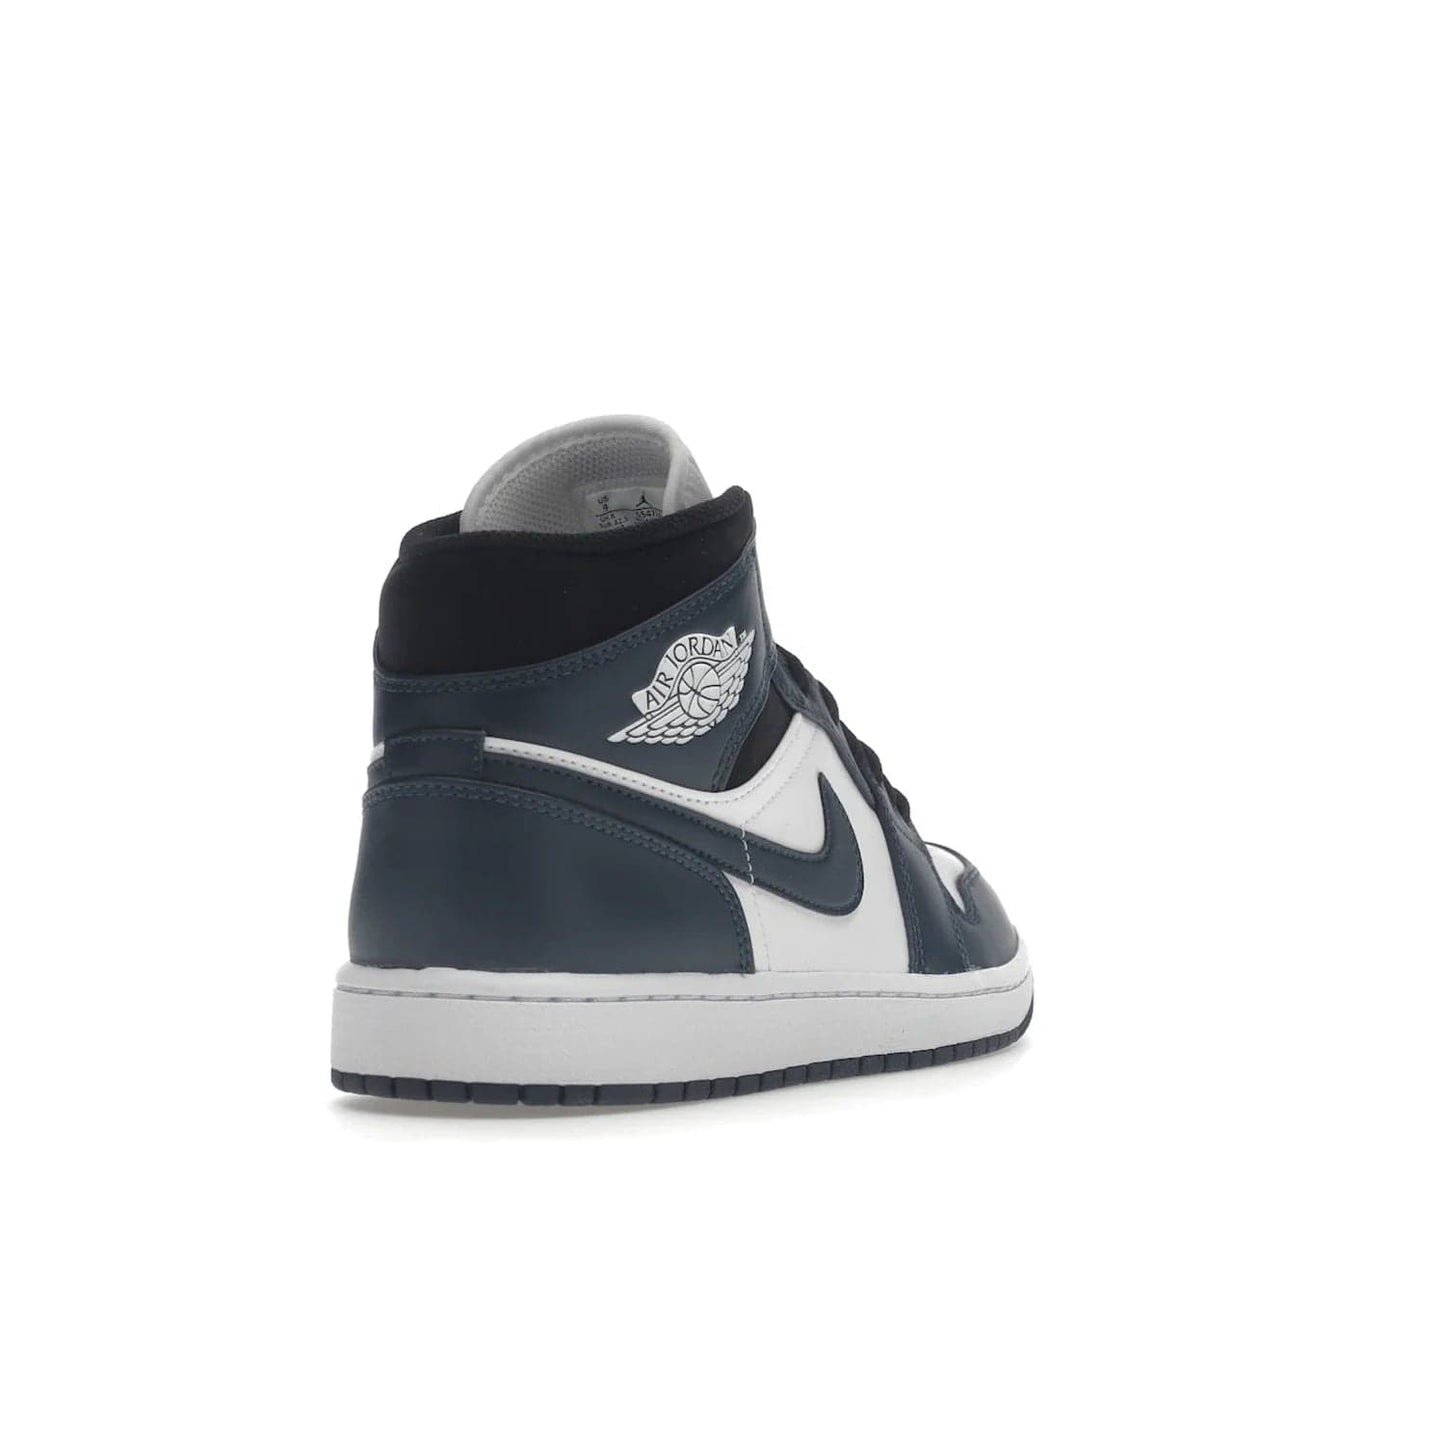 Jordan 1 Mid Armory Navy - Image 31 - Only at www.BallersClubKickz.com - The Jordan 1 Mid Armory Navy: classic basketball sneaker with soft white leather upper, deep navy blue overlays, and black leather ankle detailing. Iconic style with Jordan Wings logo and Jumpman label.